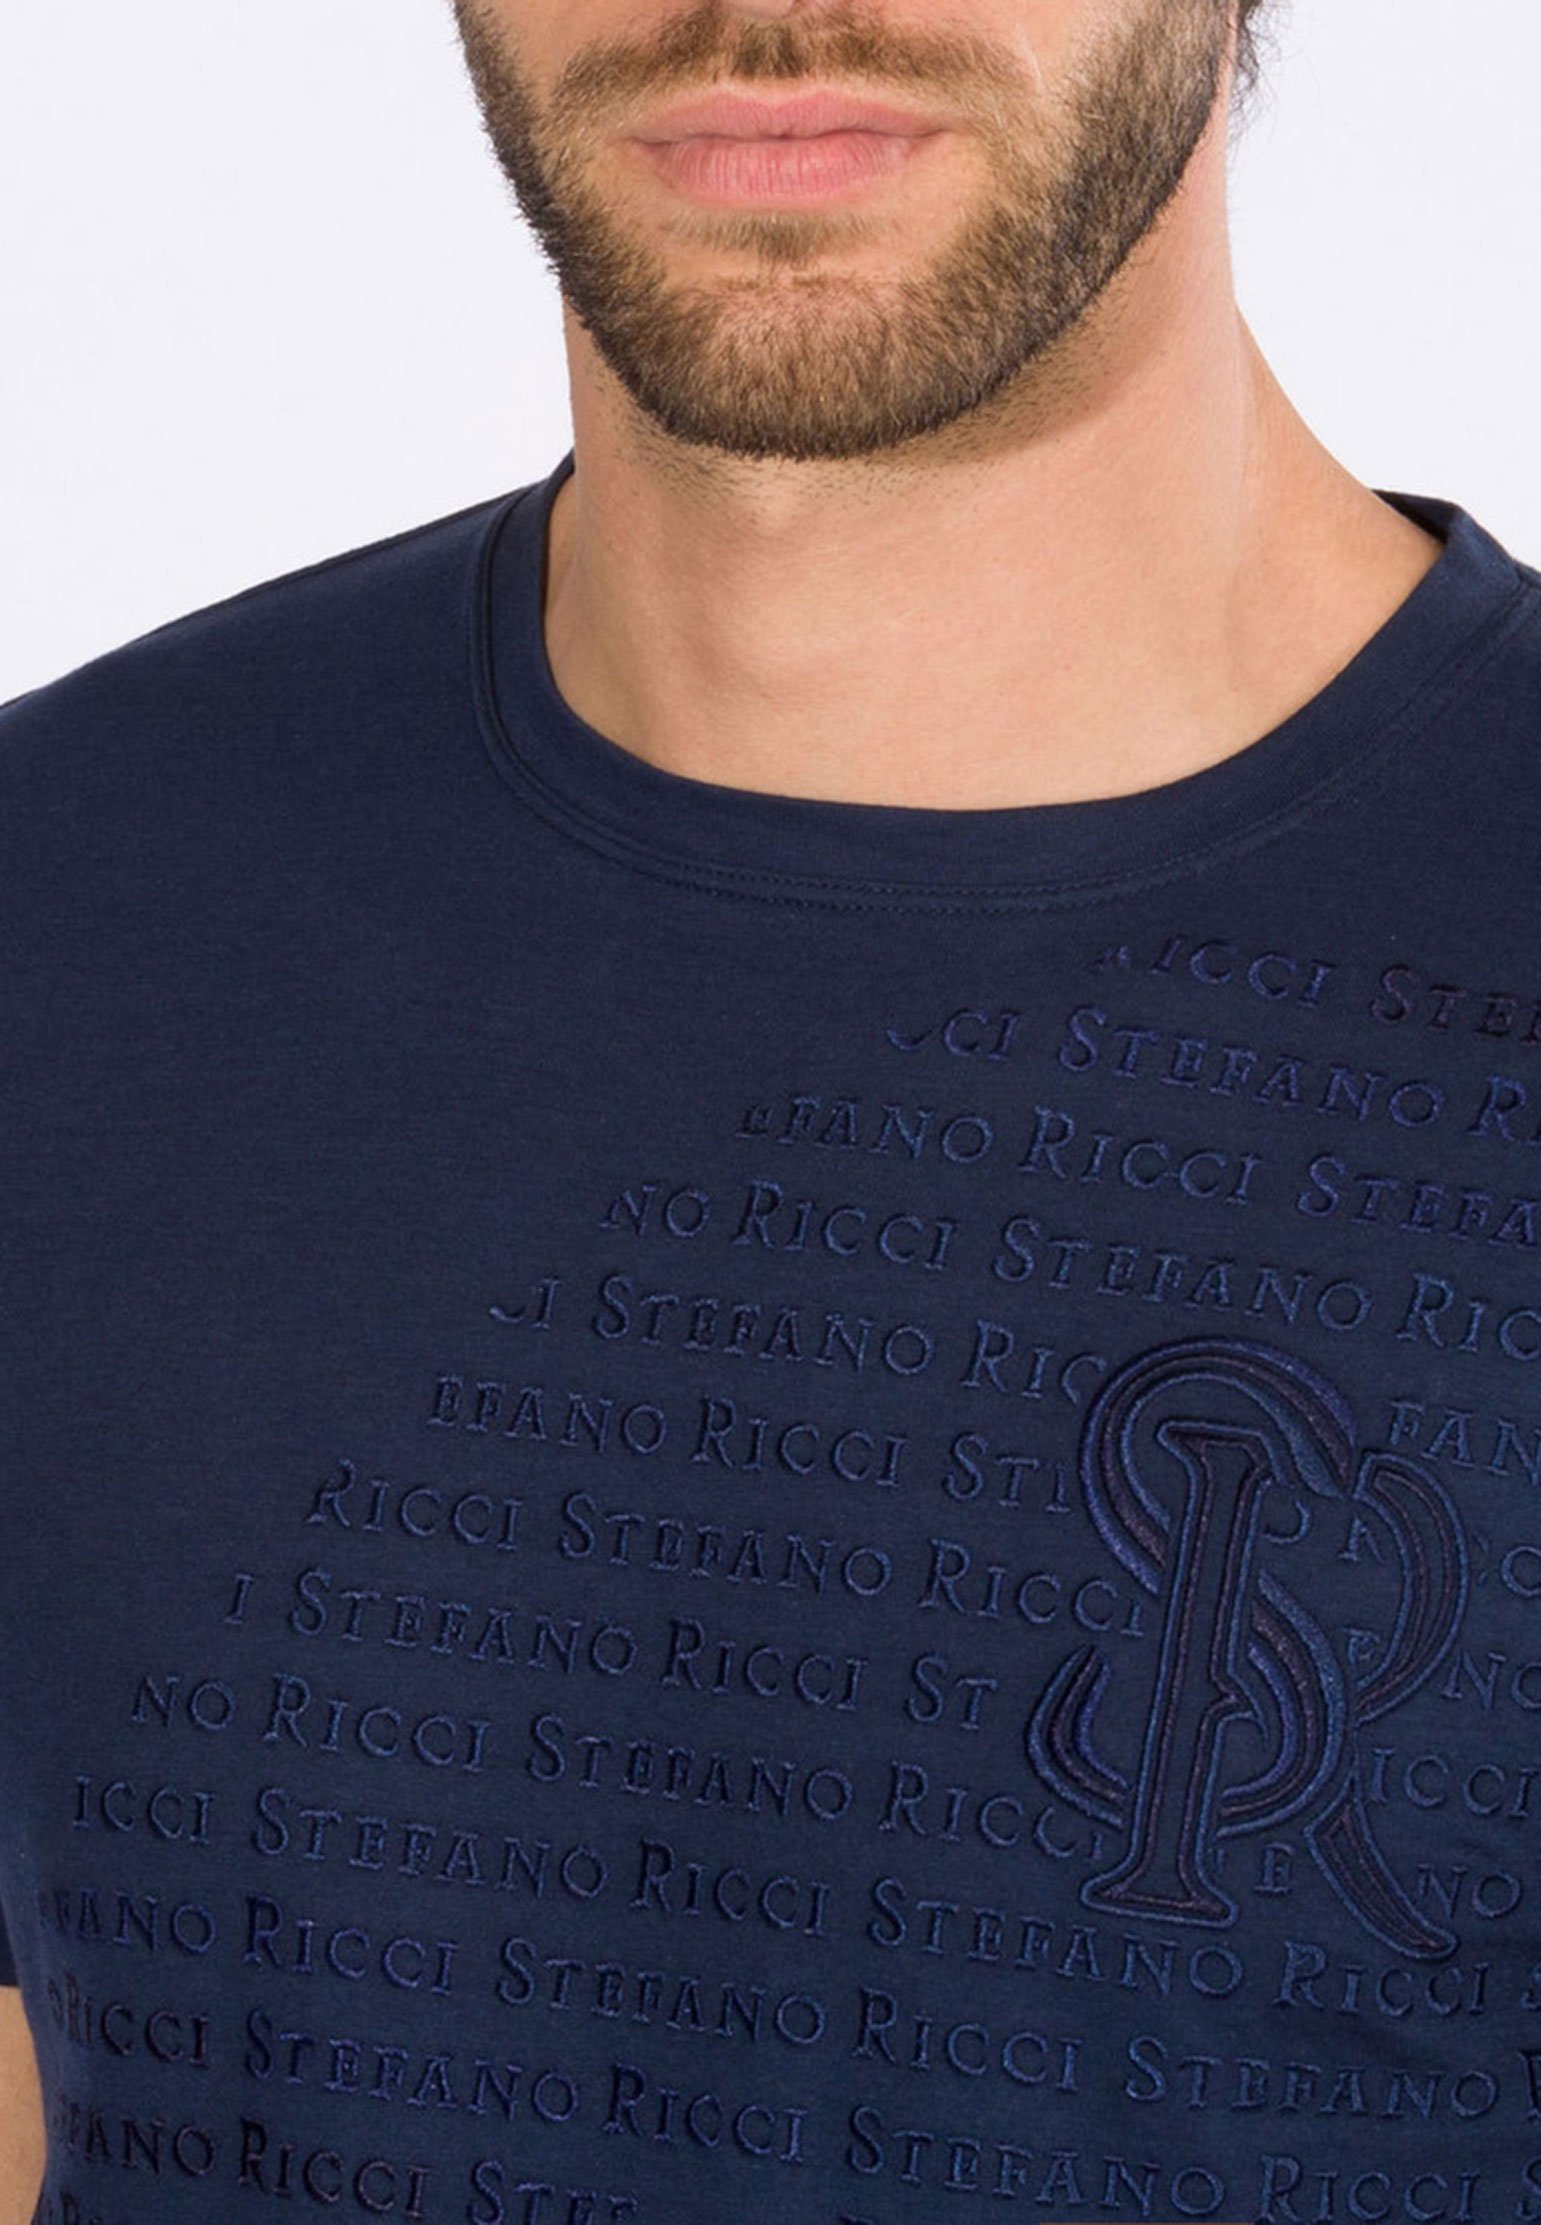 T-shirt STEFANO RICCI Color: blue marine (Code: 331) in online store Allure